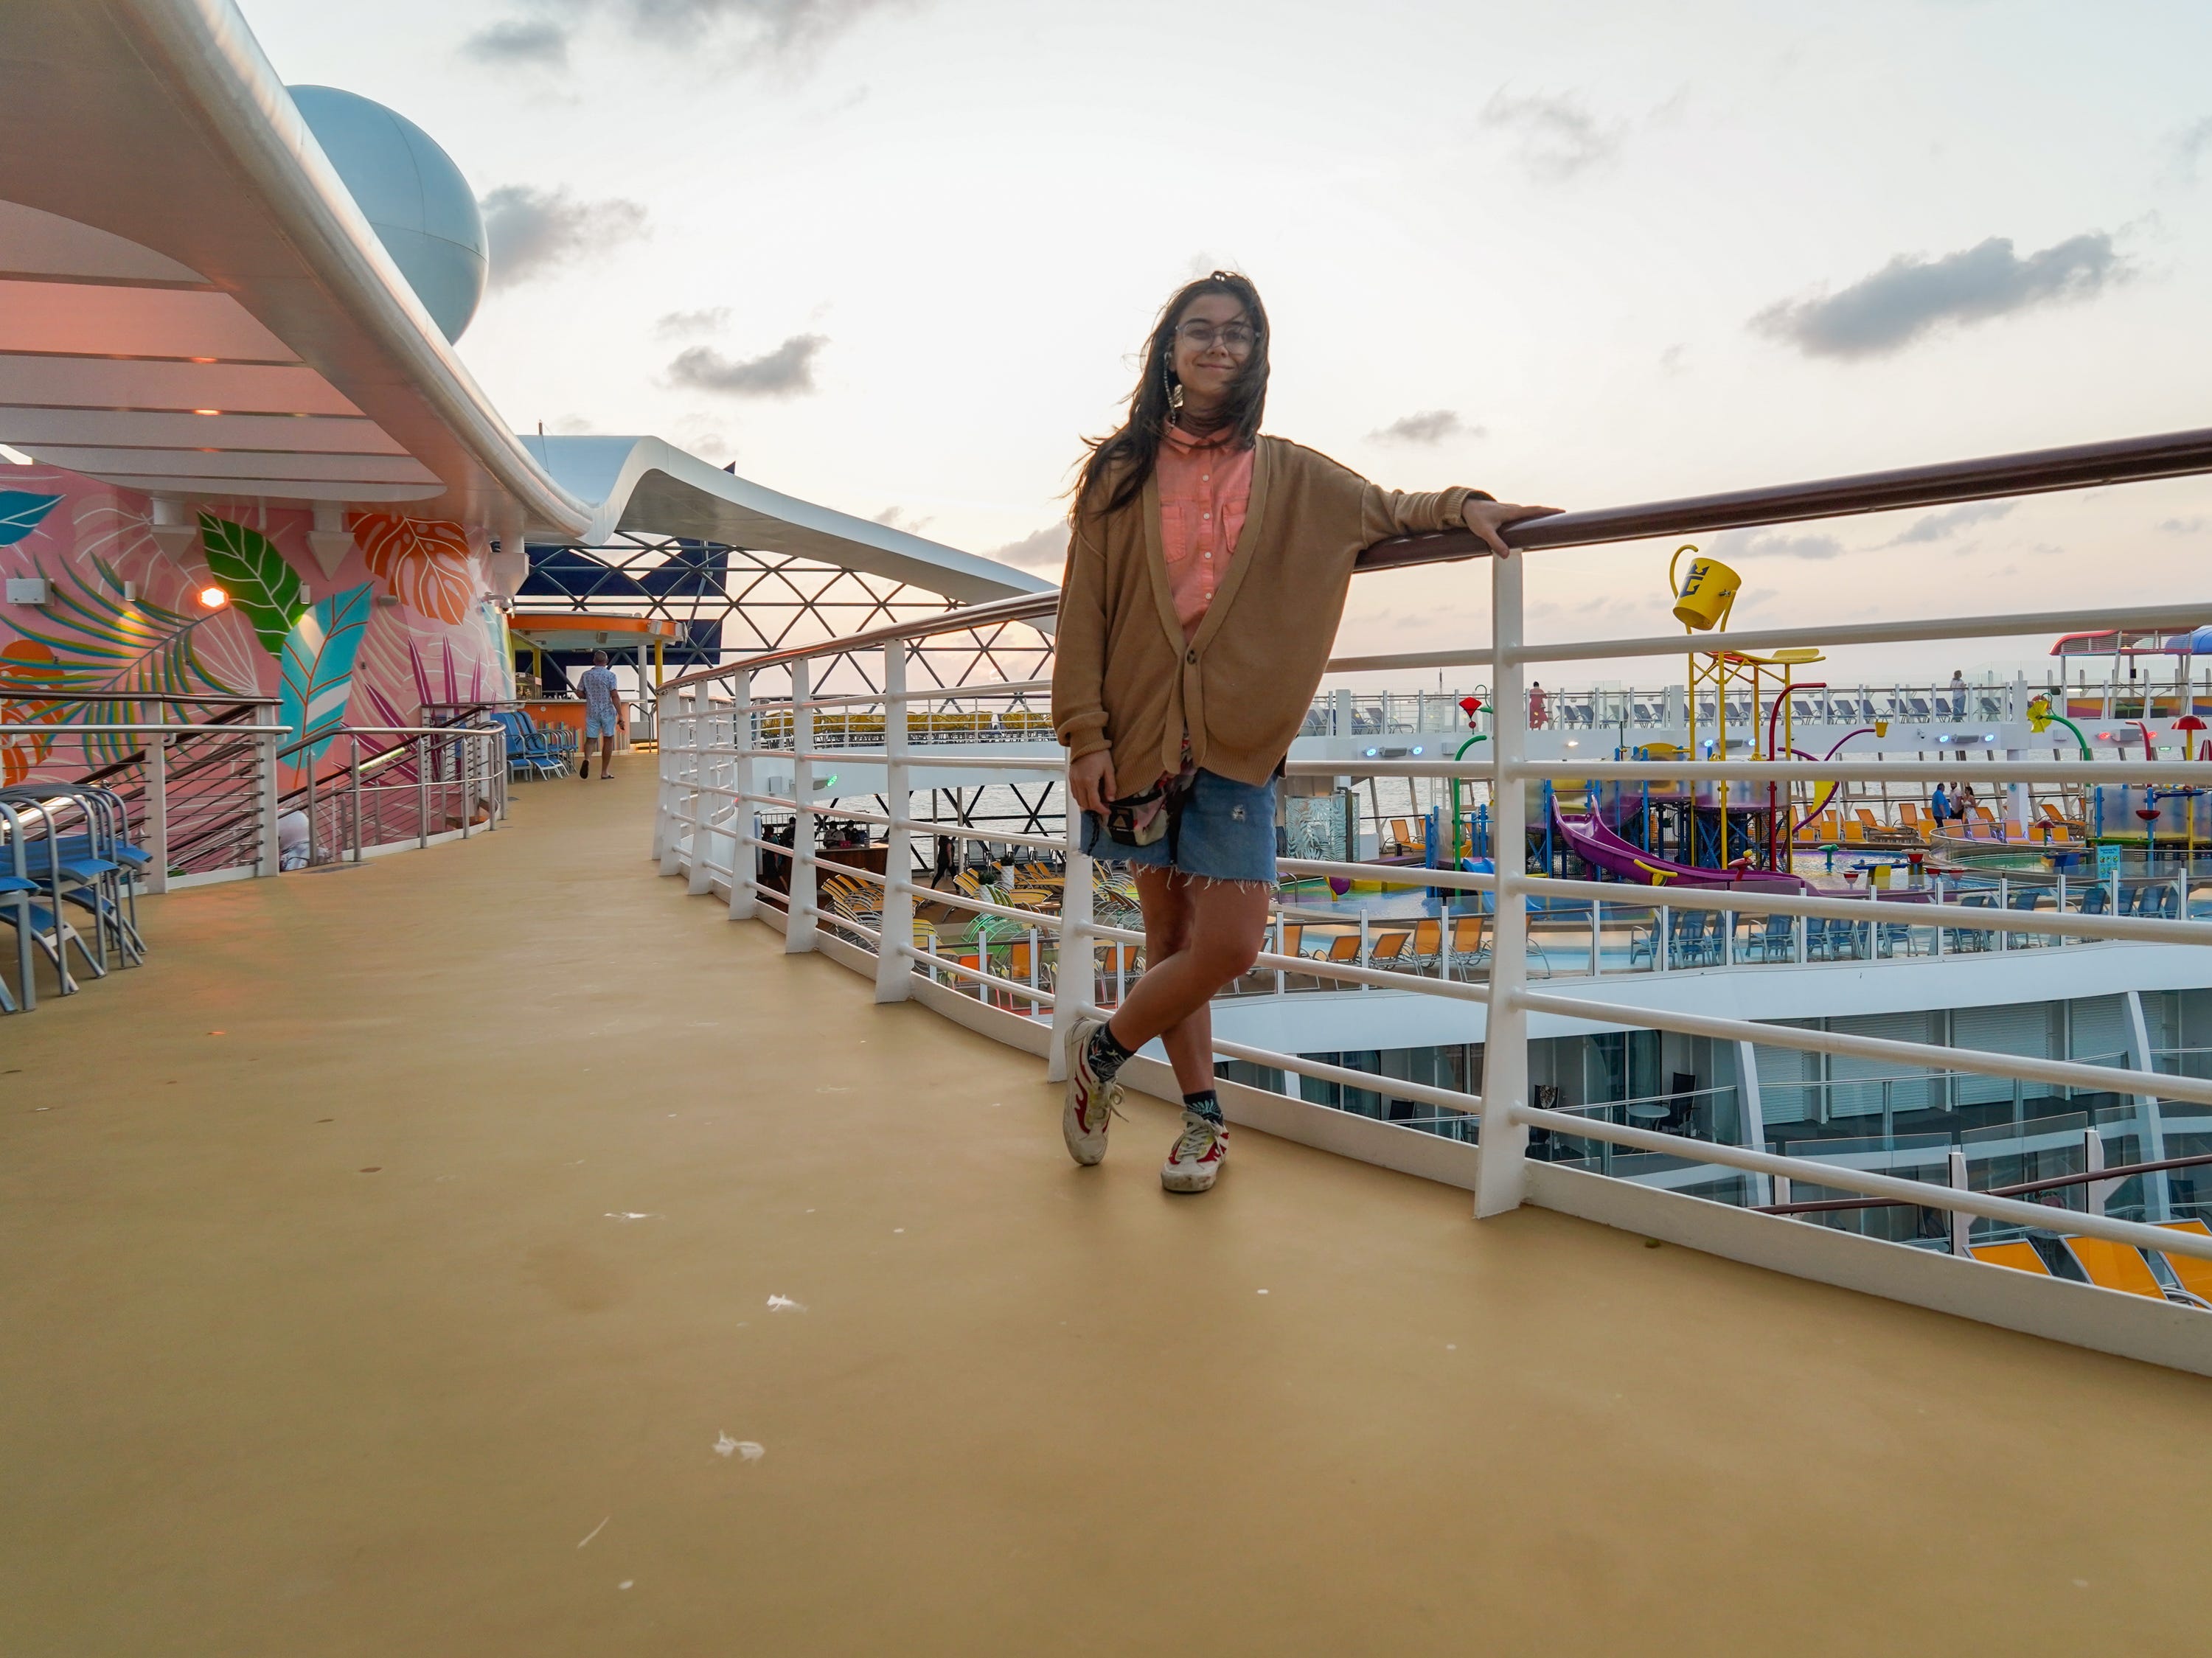 <p>Overall, my trip left me in awe. I learned that there's nothing like looking out from the top deck and seeing only the ocean surrounding you.</p><p>But next time I want to visit the Caribbean, I'll take a plane to one place and explore it deeply. </p>